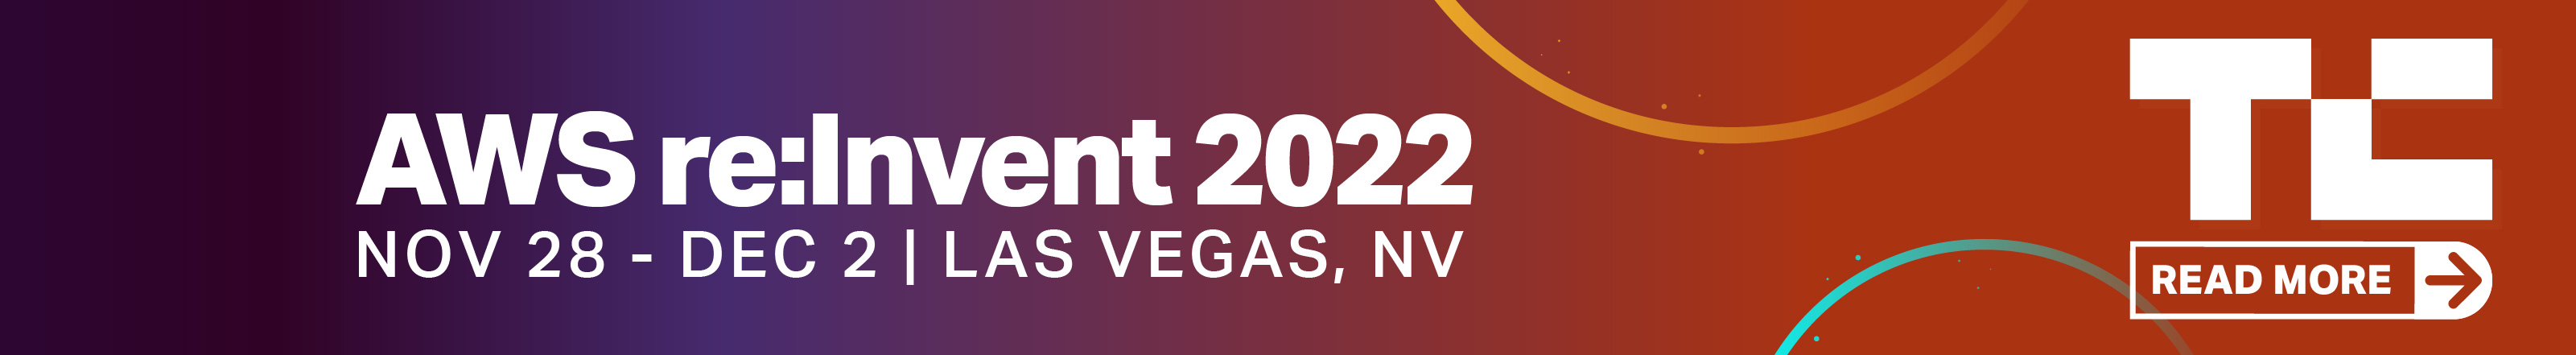 Read more about AWS re:Invent 2022 on TechCrunch